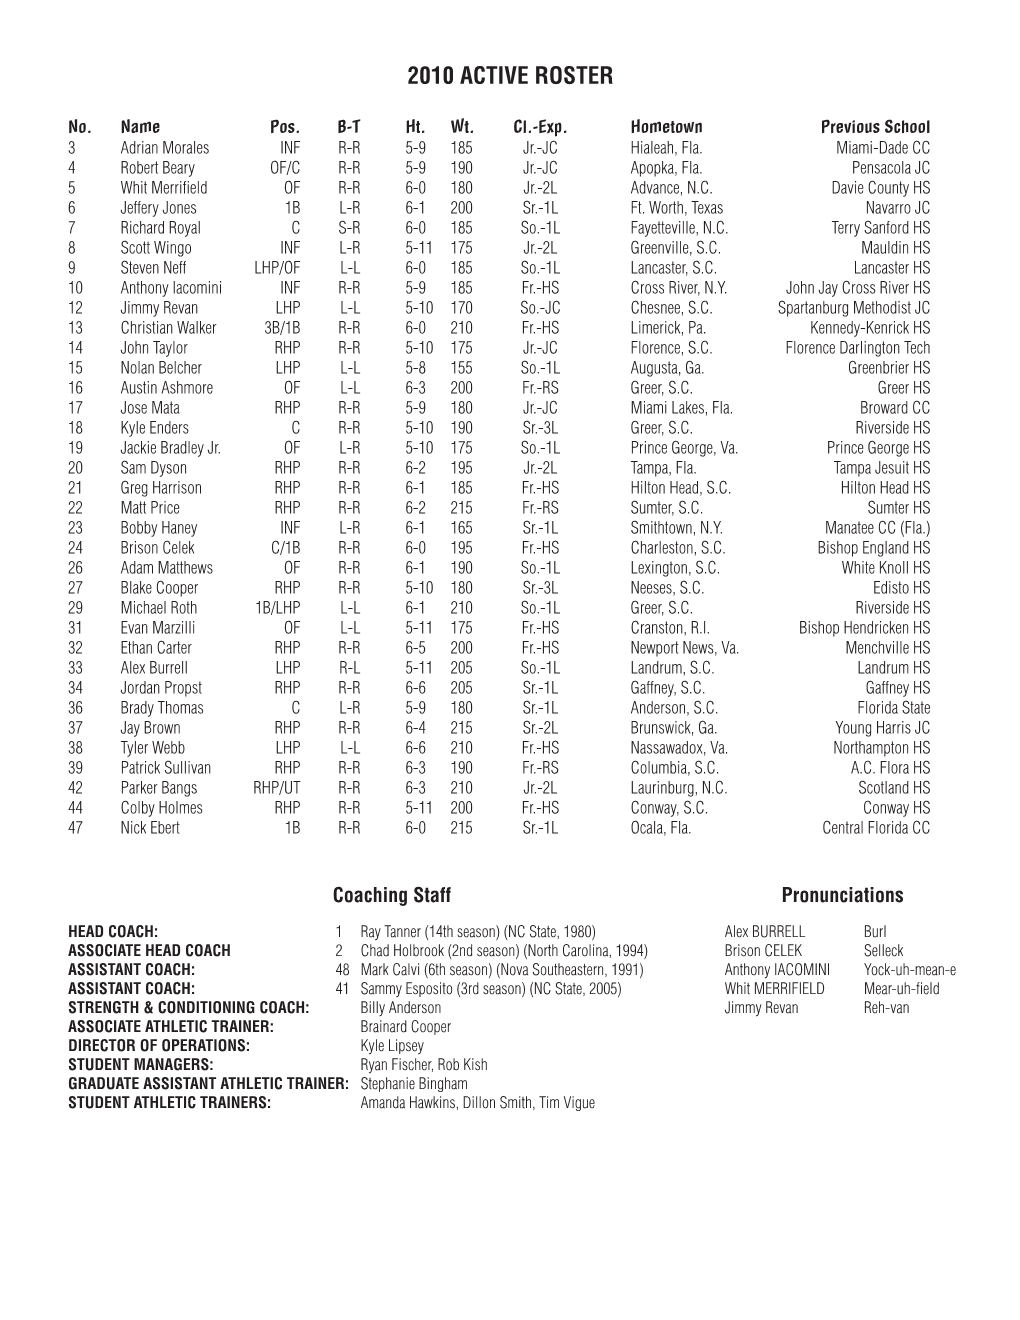 2010 Active Roster